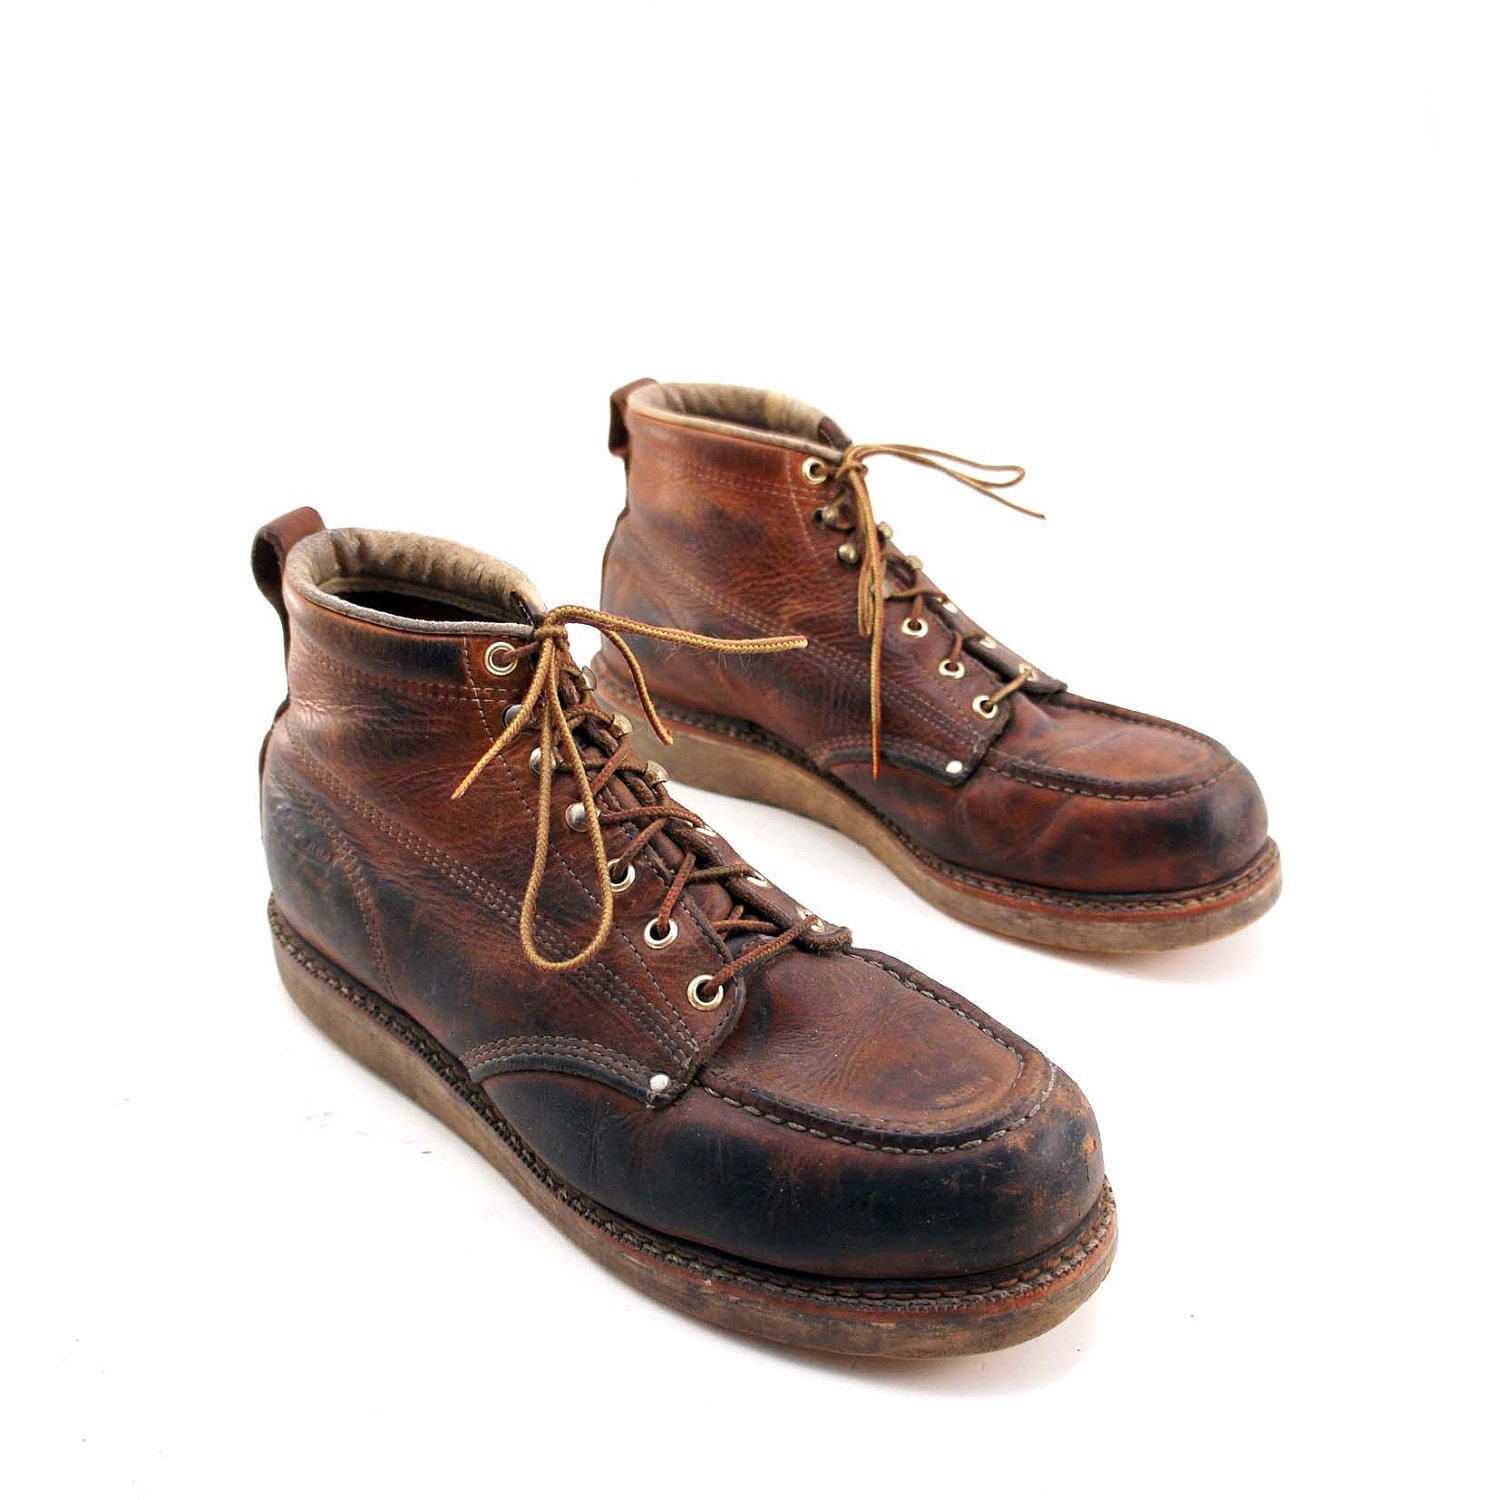 Field N' Forest Steel Toe Work Boots for a by RabbitHouseVintage